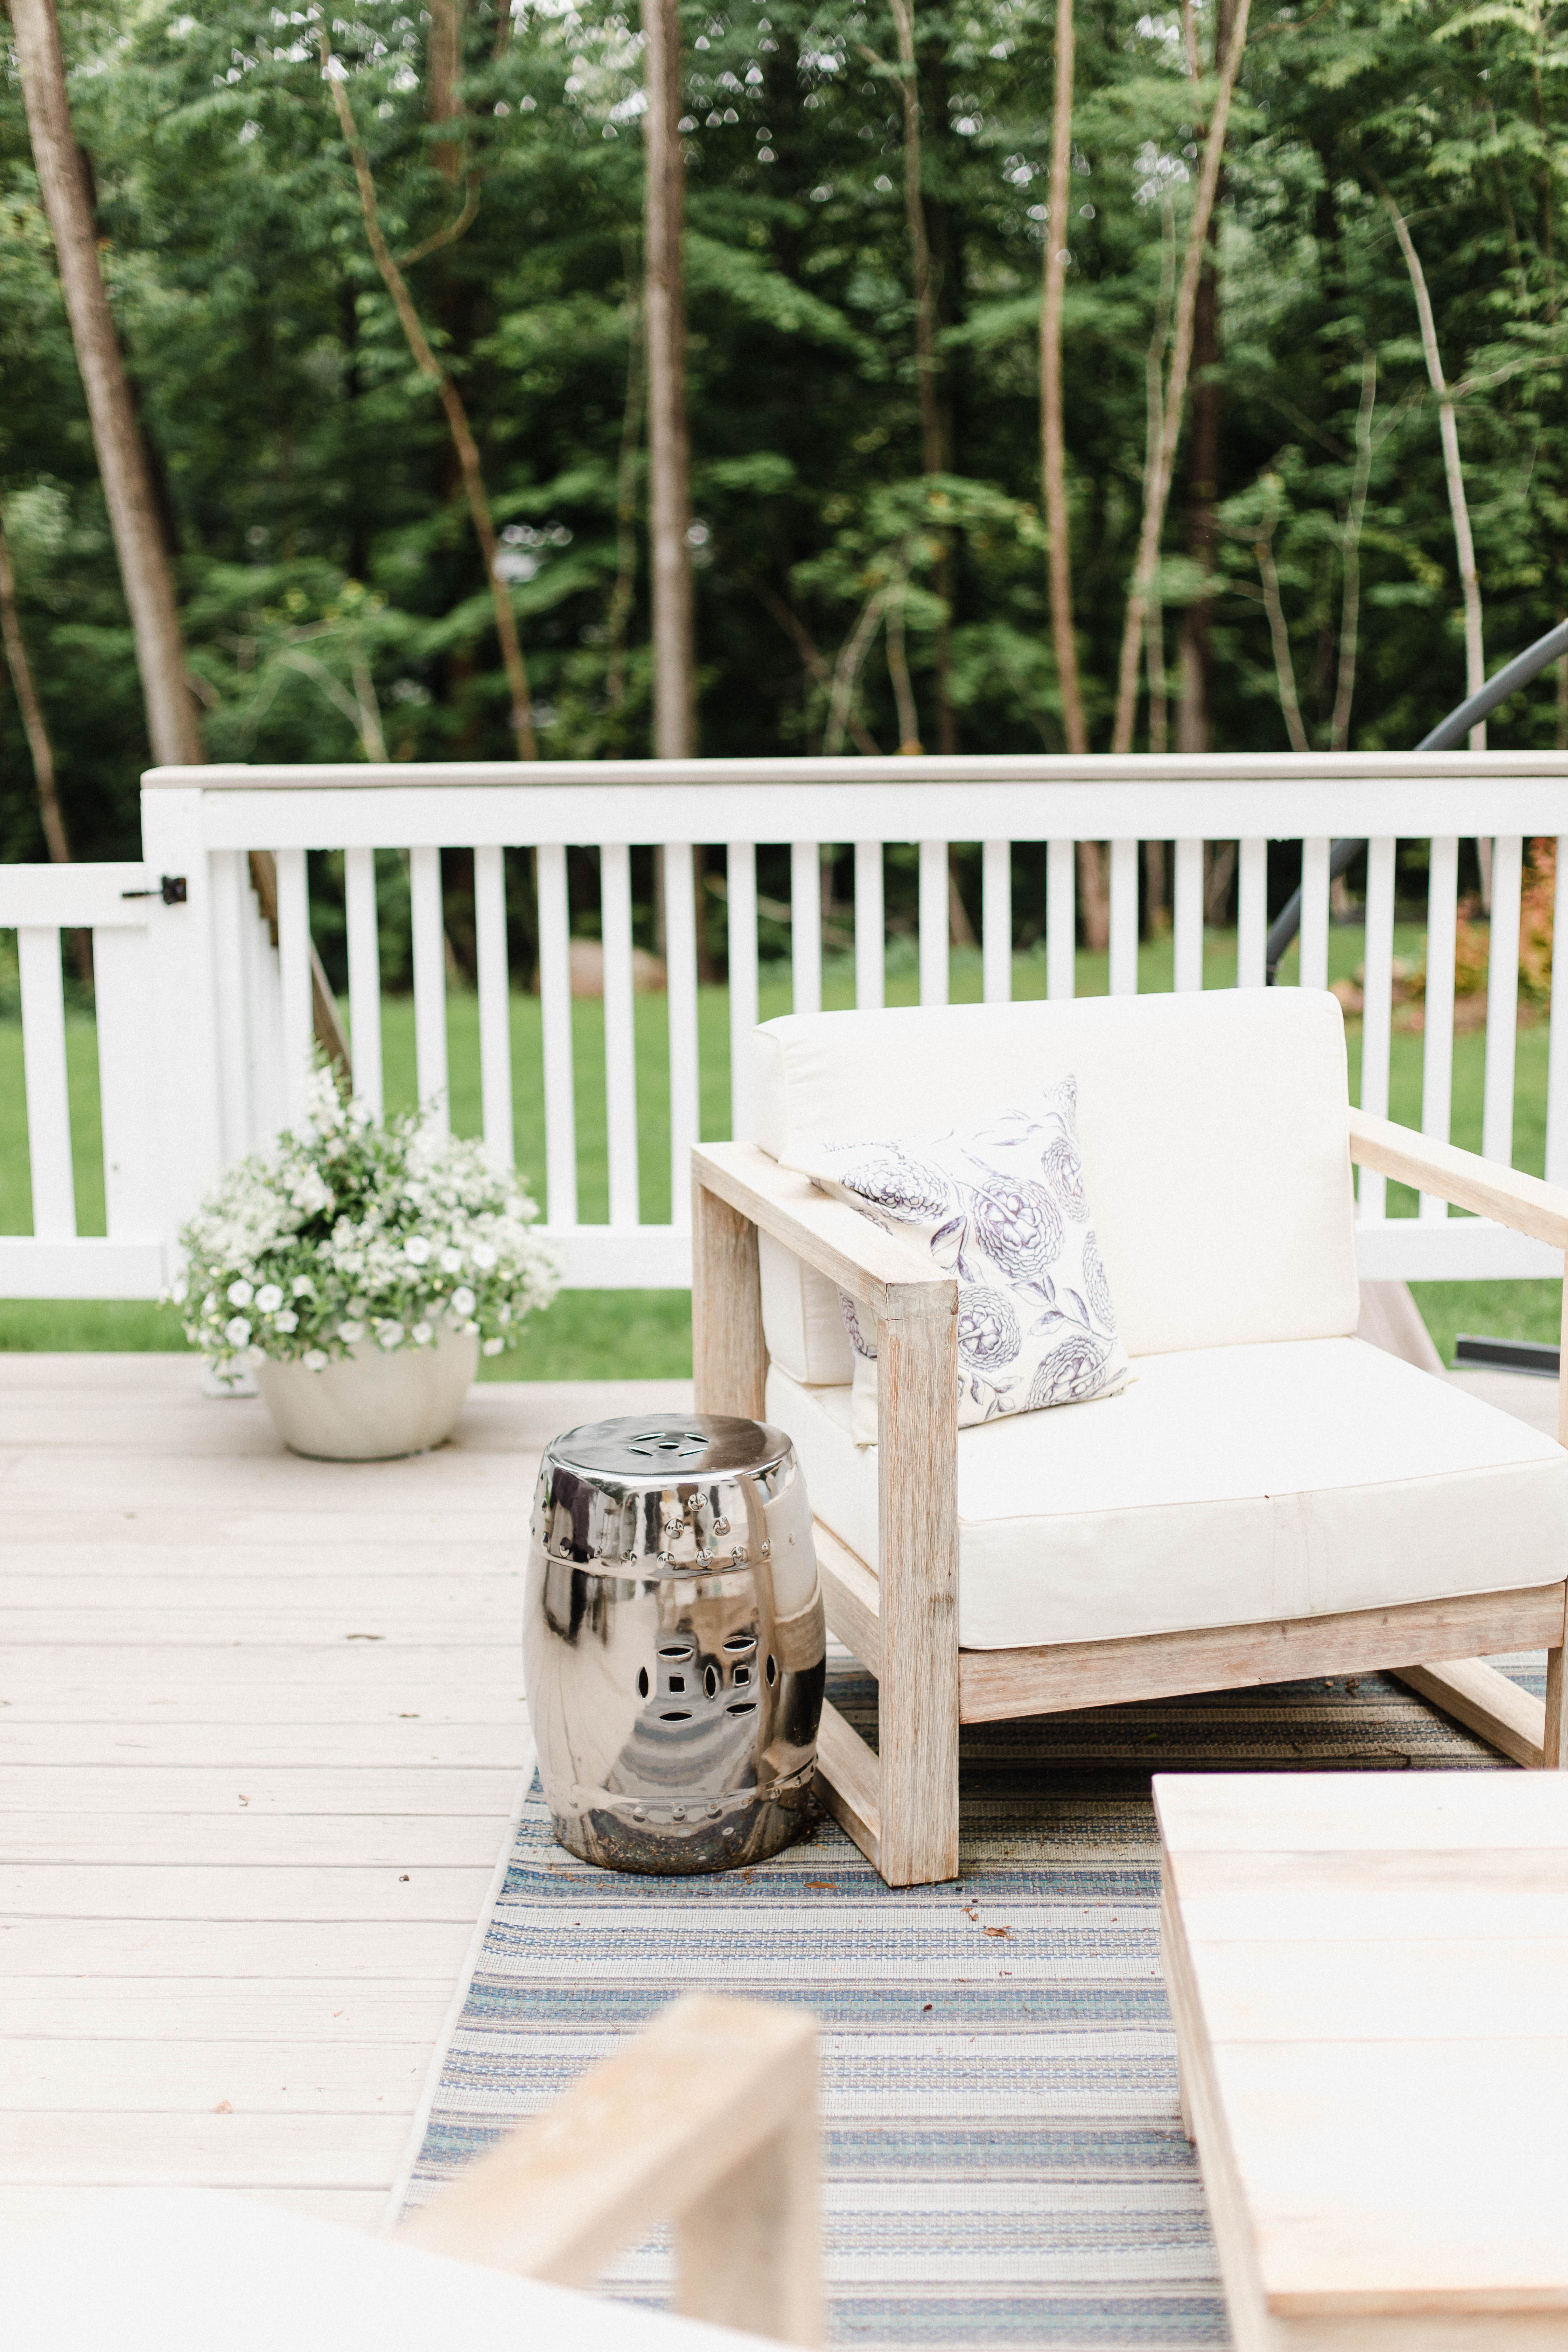 Connecticut life and style blogger Lauren McBride shares her picks from QVC's Safavieh sale, including rugs and outdoor decor.Connecticut life and style blogger Lauren McBride shares her picks from QVC's Safavieh sale, including rugs and outdoor decor.